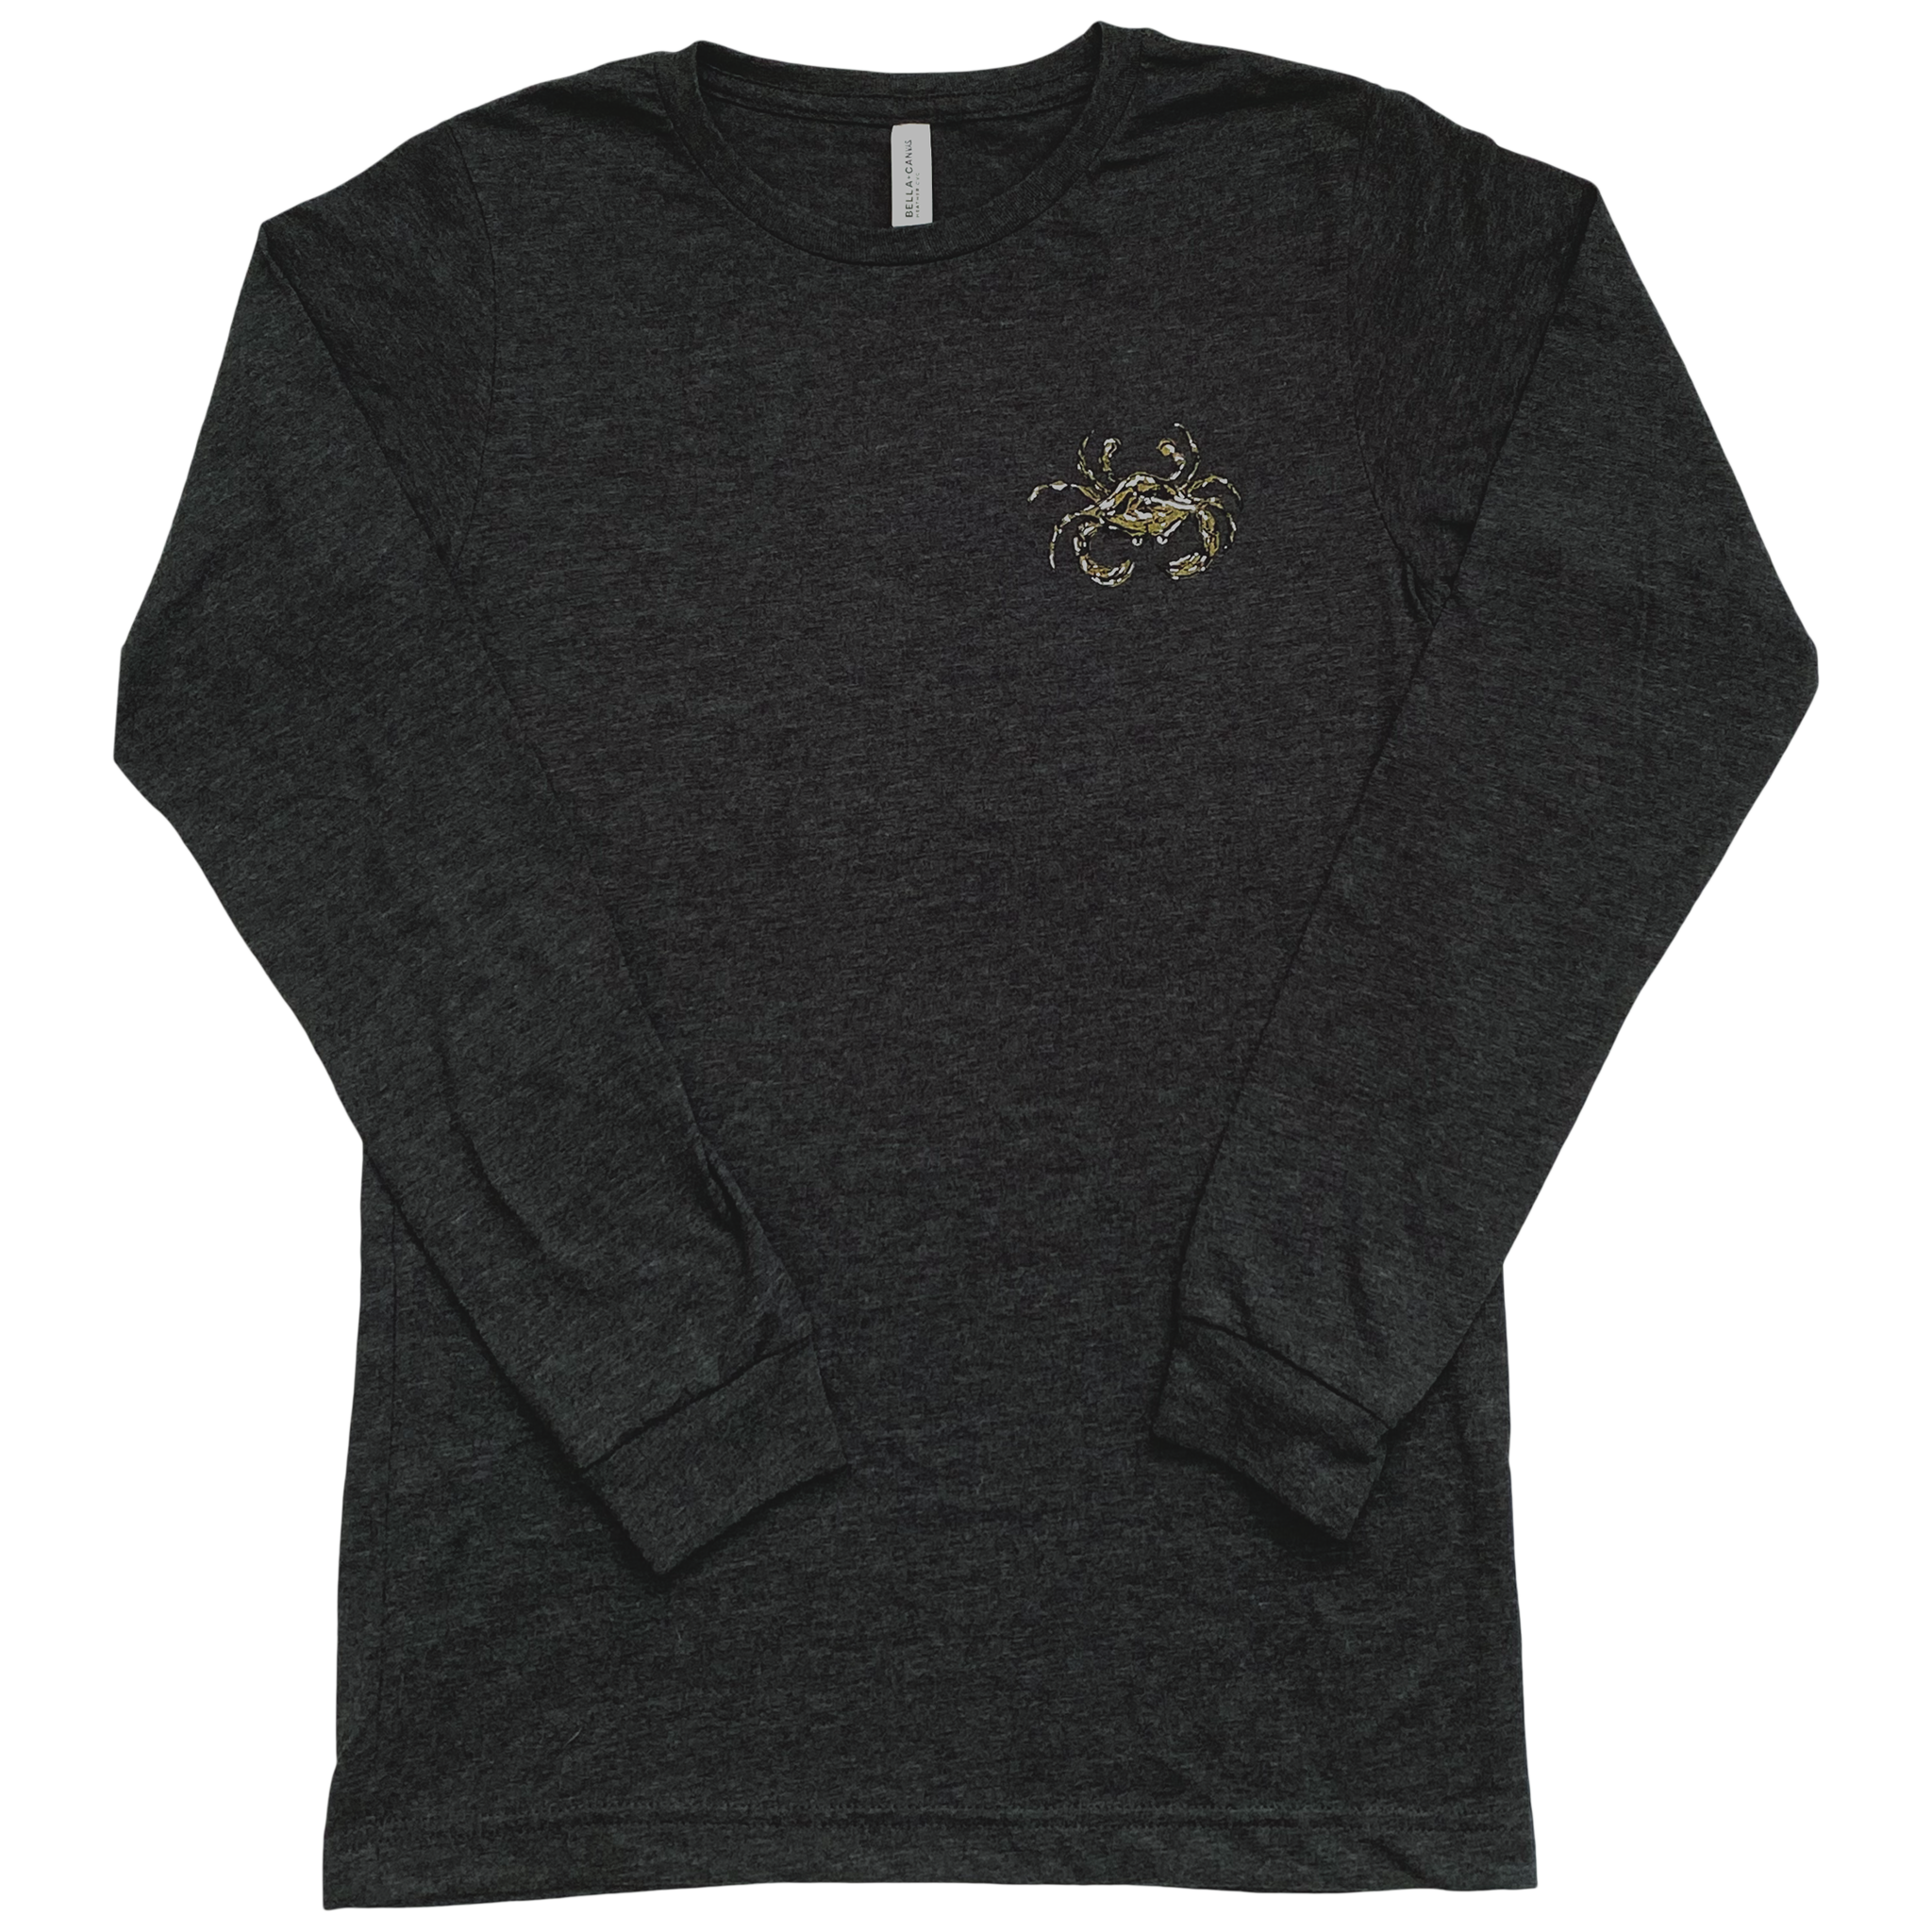 A long sleeve dark heather gray t-shirt with a black, gold, and white crab on the left chest.